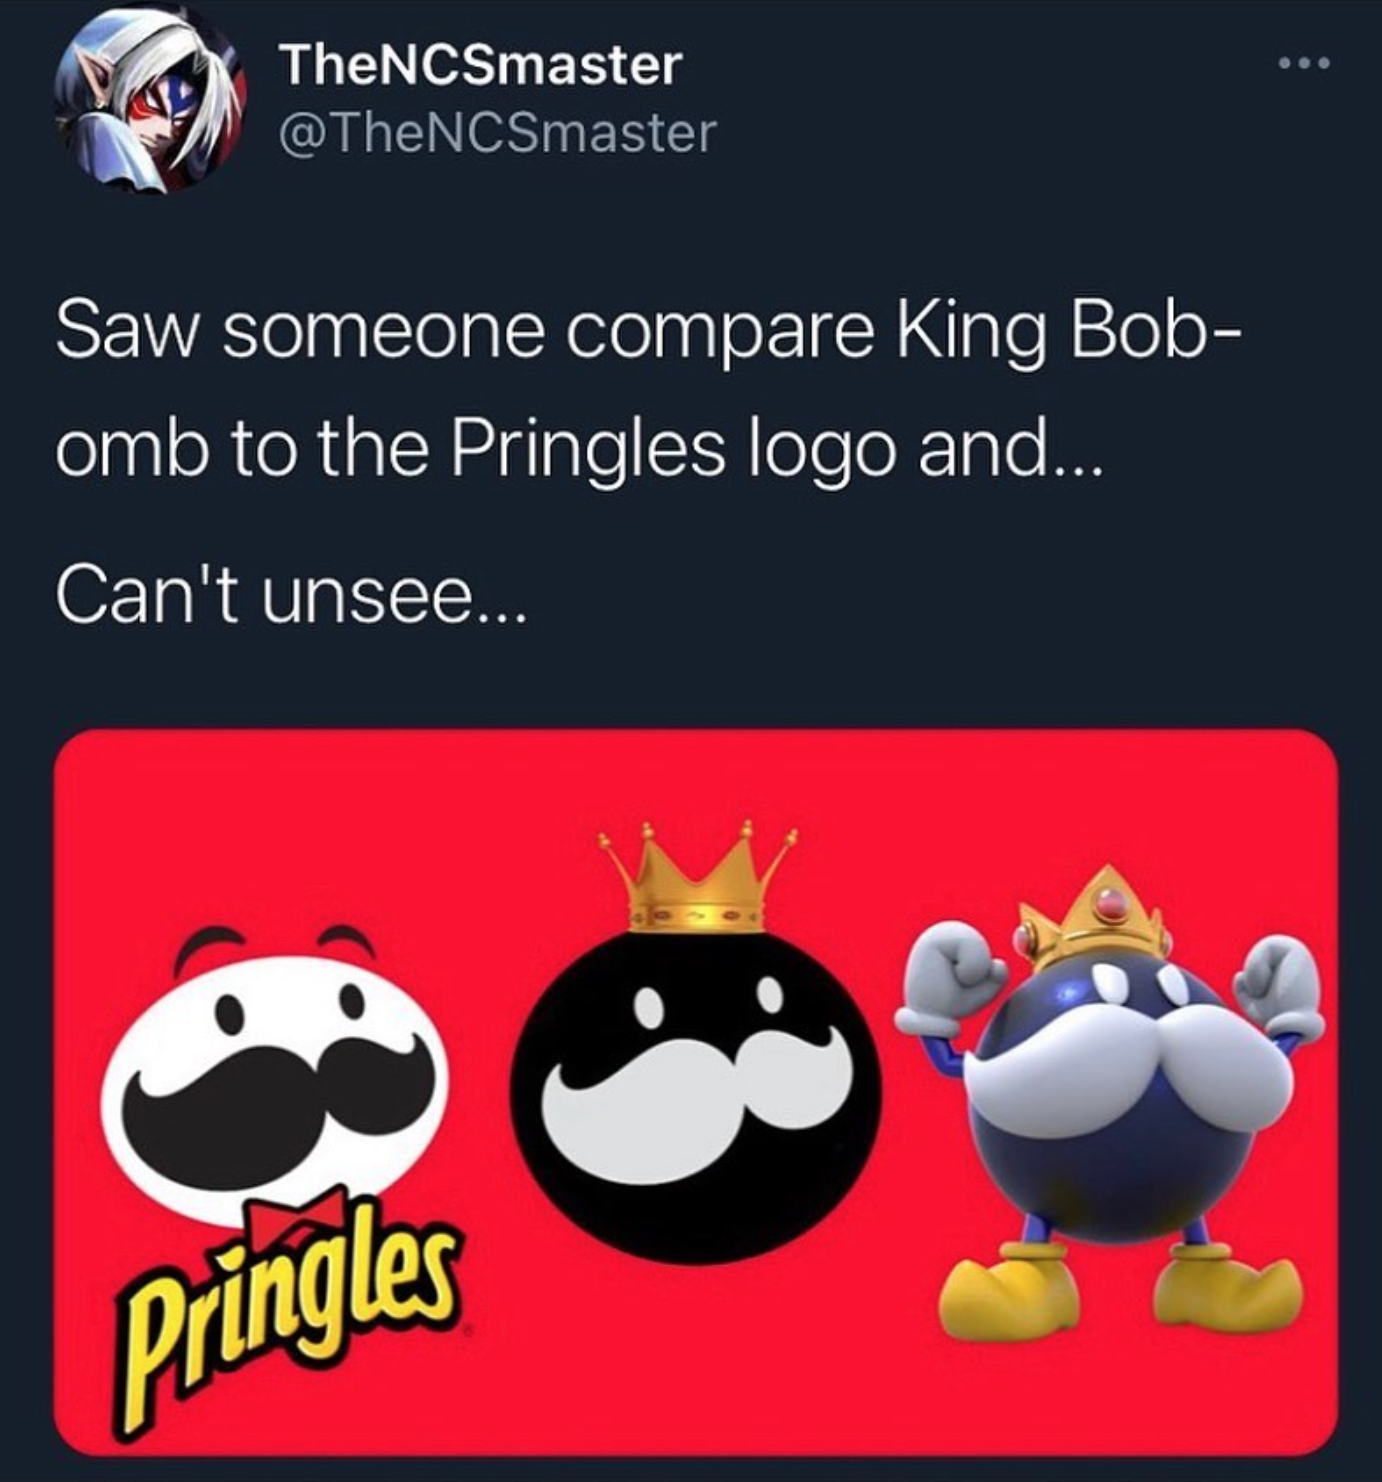 funny gaming memes - pringles - TheNCSmaster Saw someone compare King Bob omb to the Pringles logo and... Can't unsee... Pringles